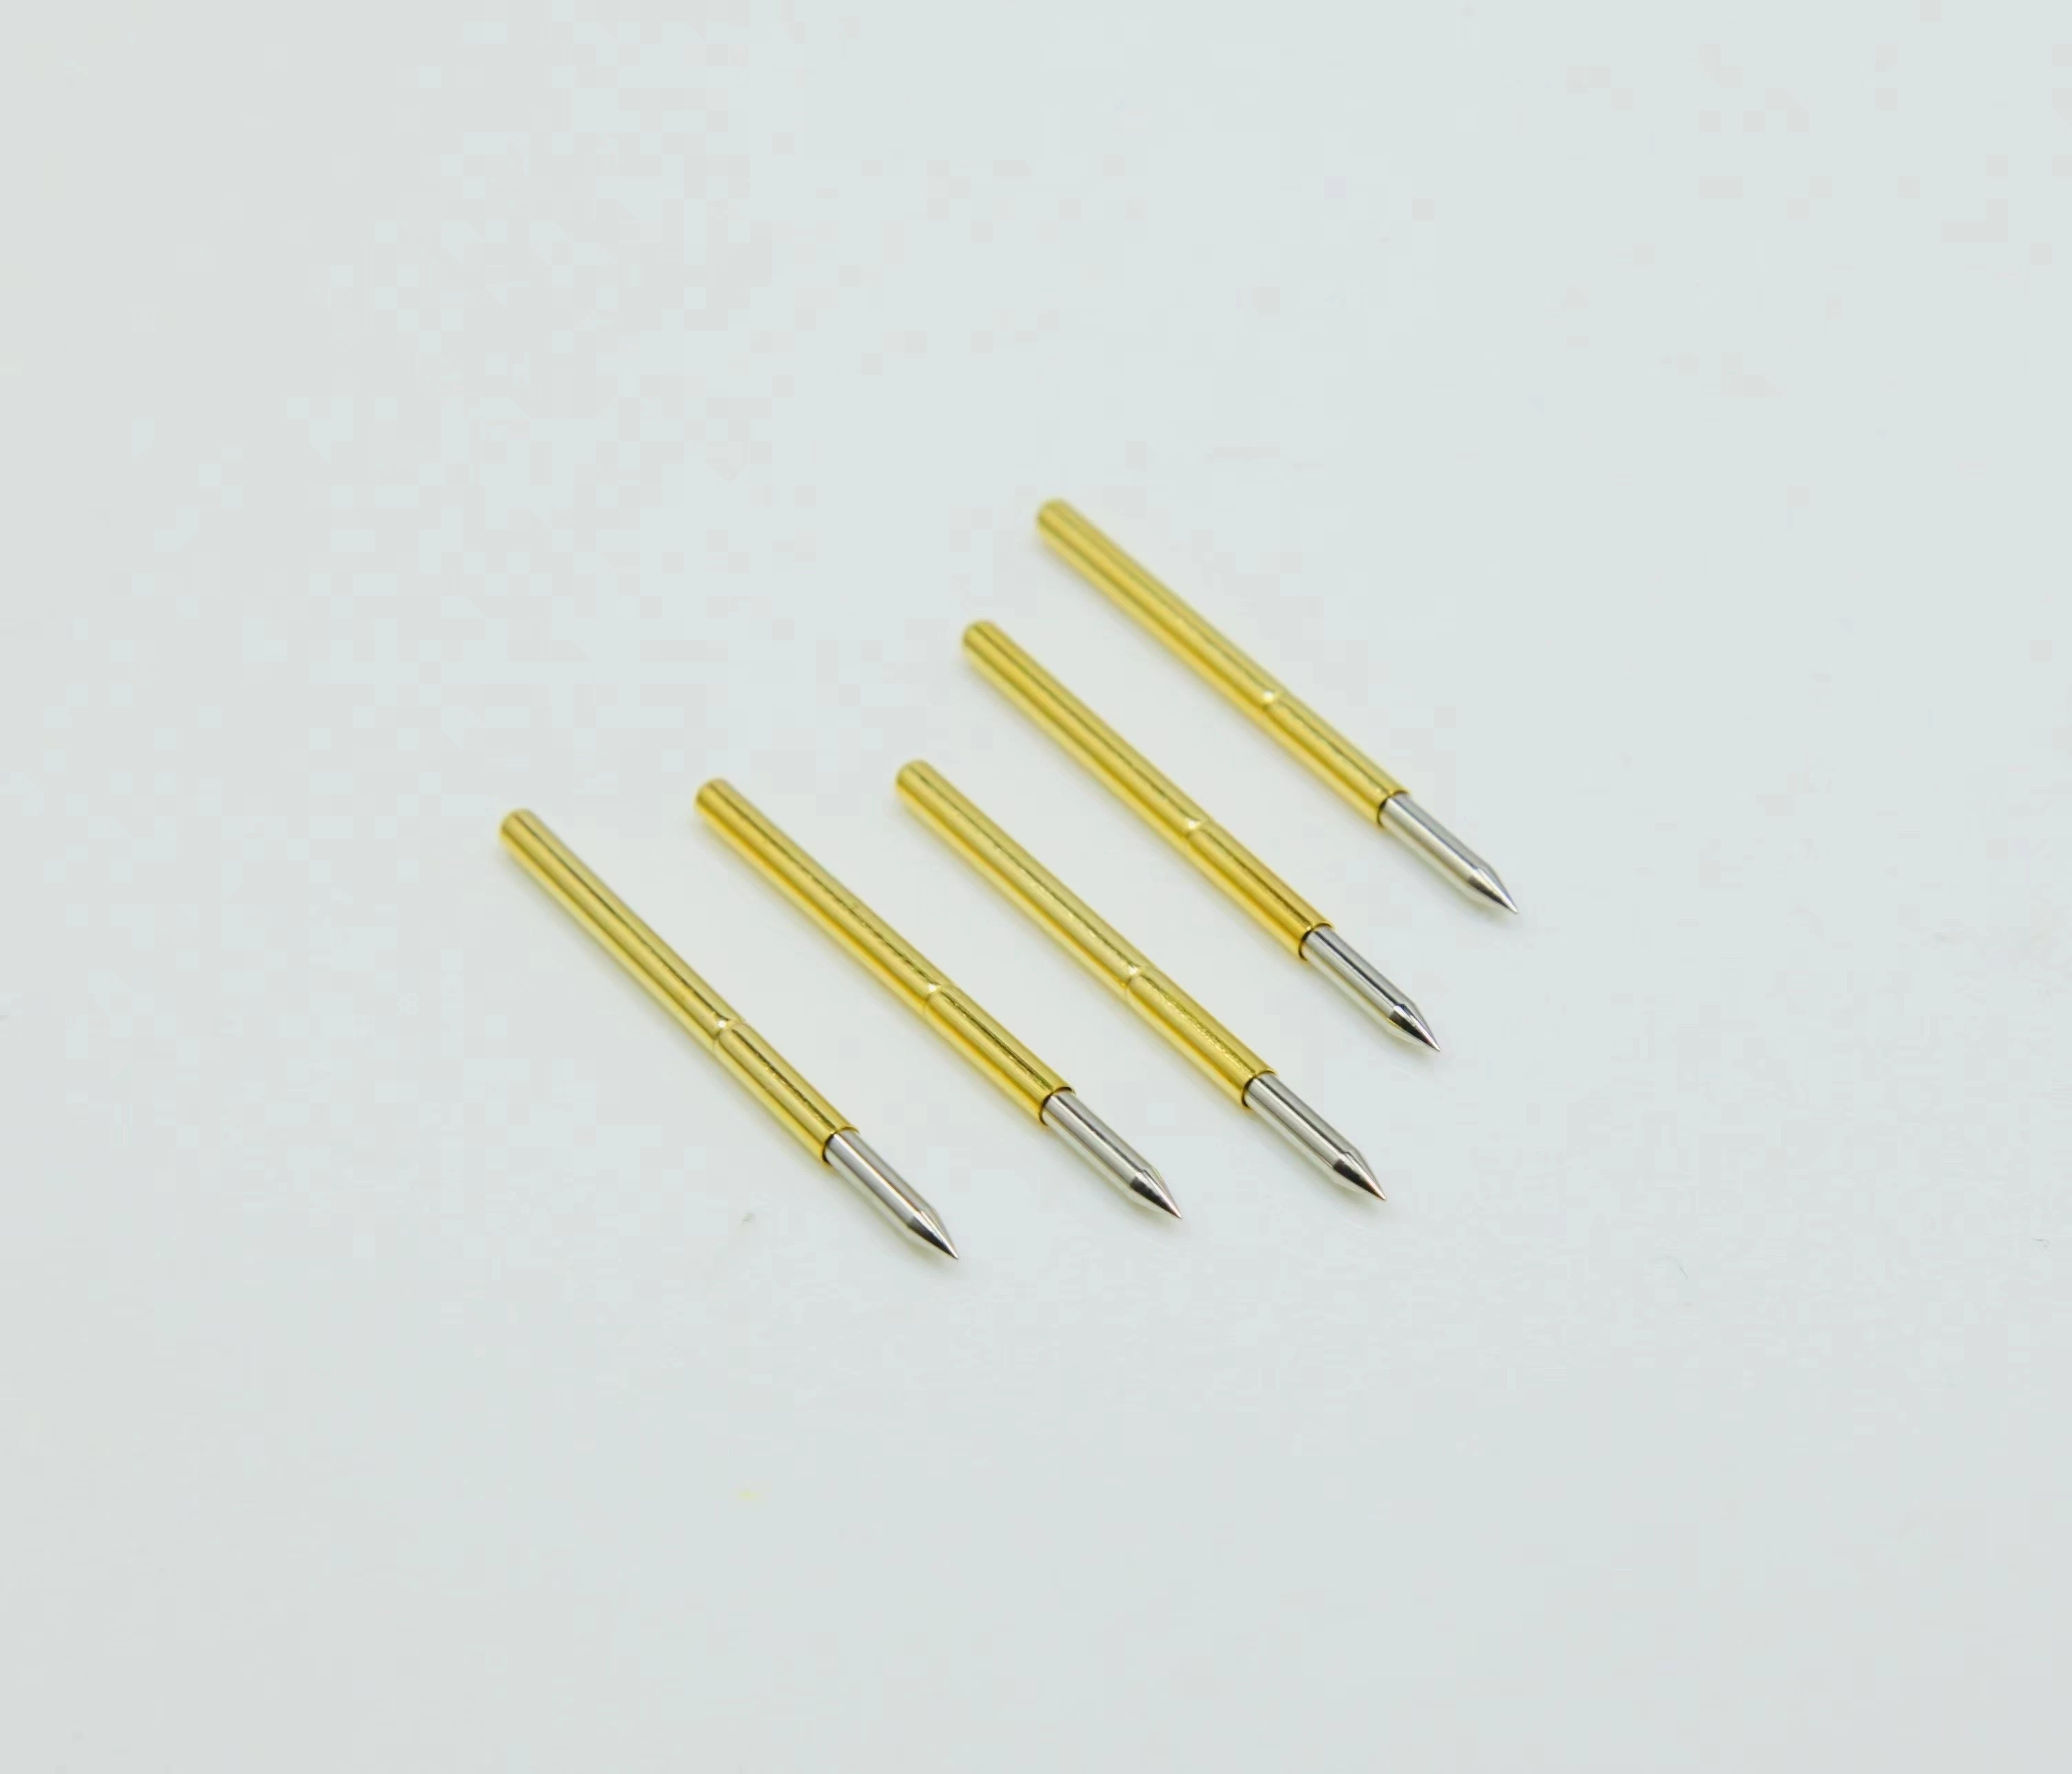 High quality 100mil ICT spring probe pins SF-P100-B with sharp tip